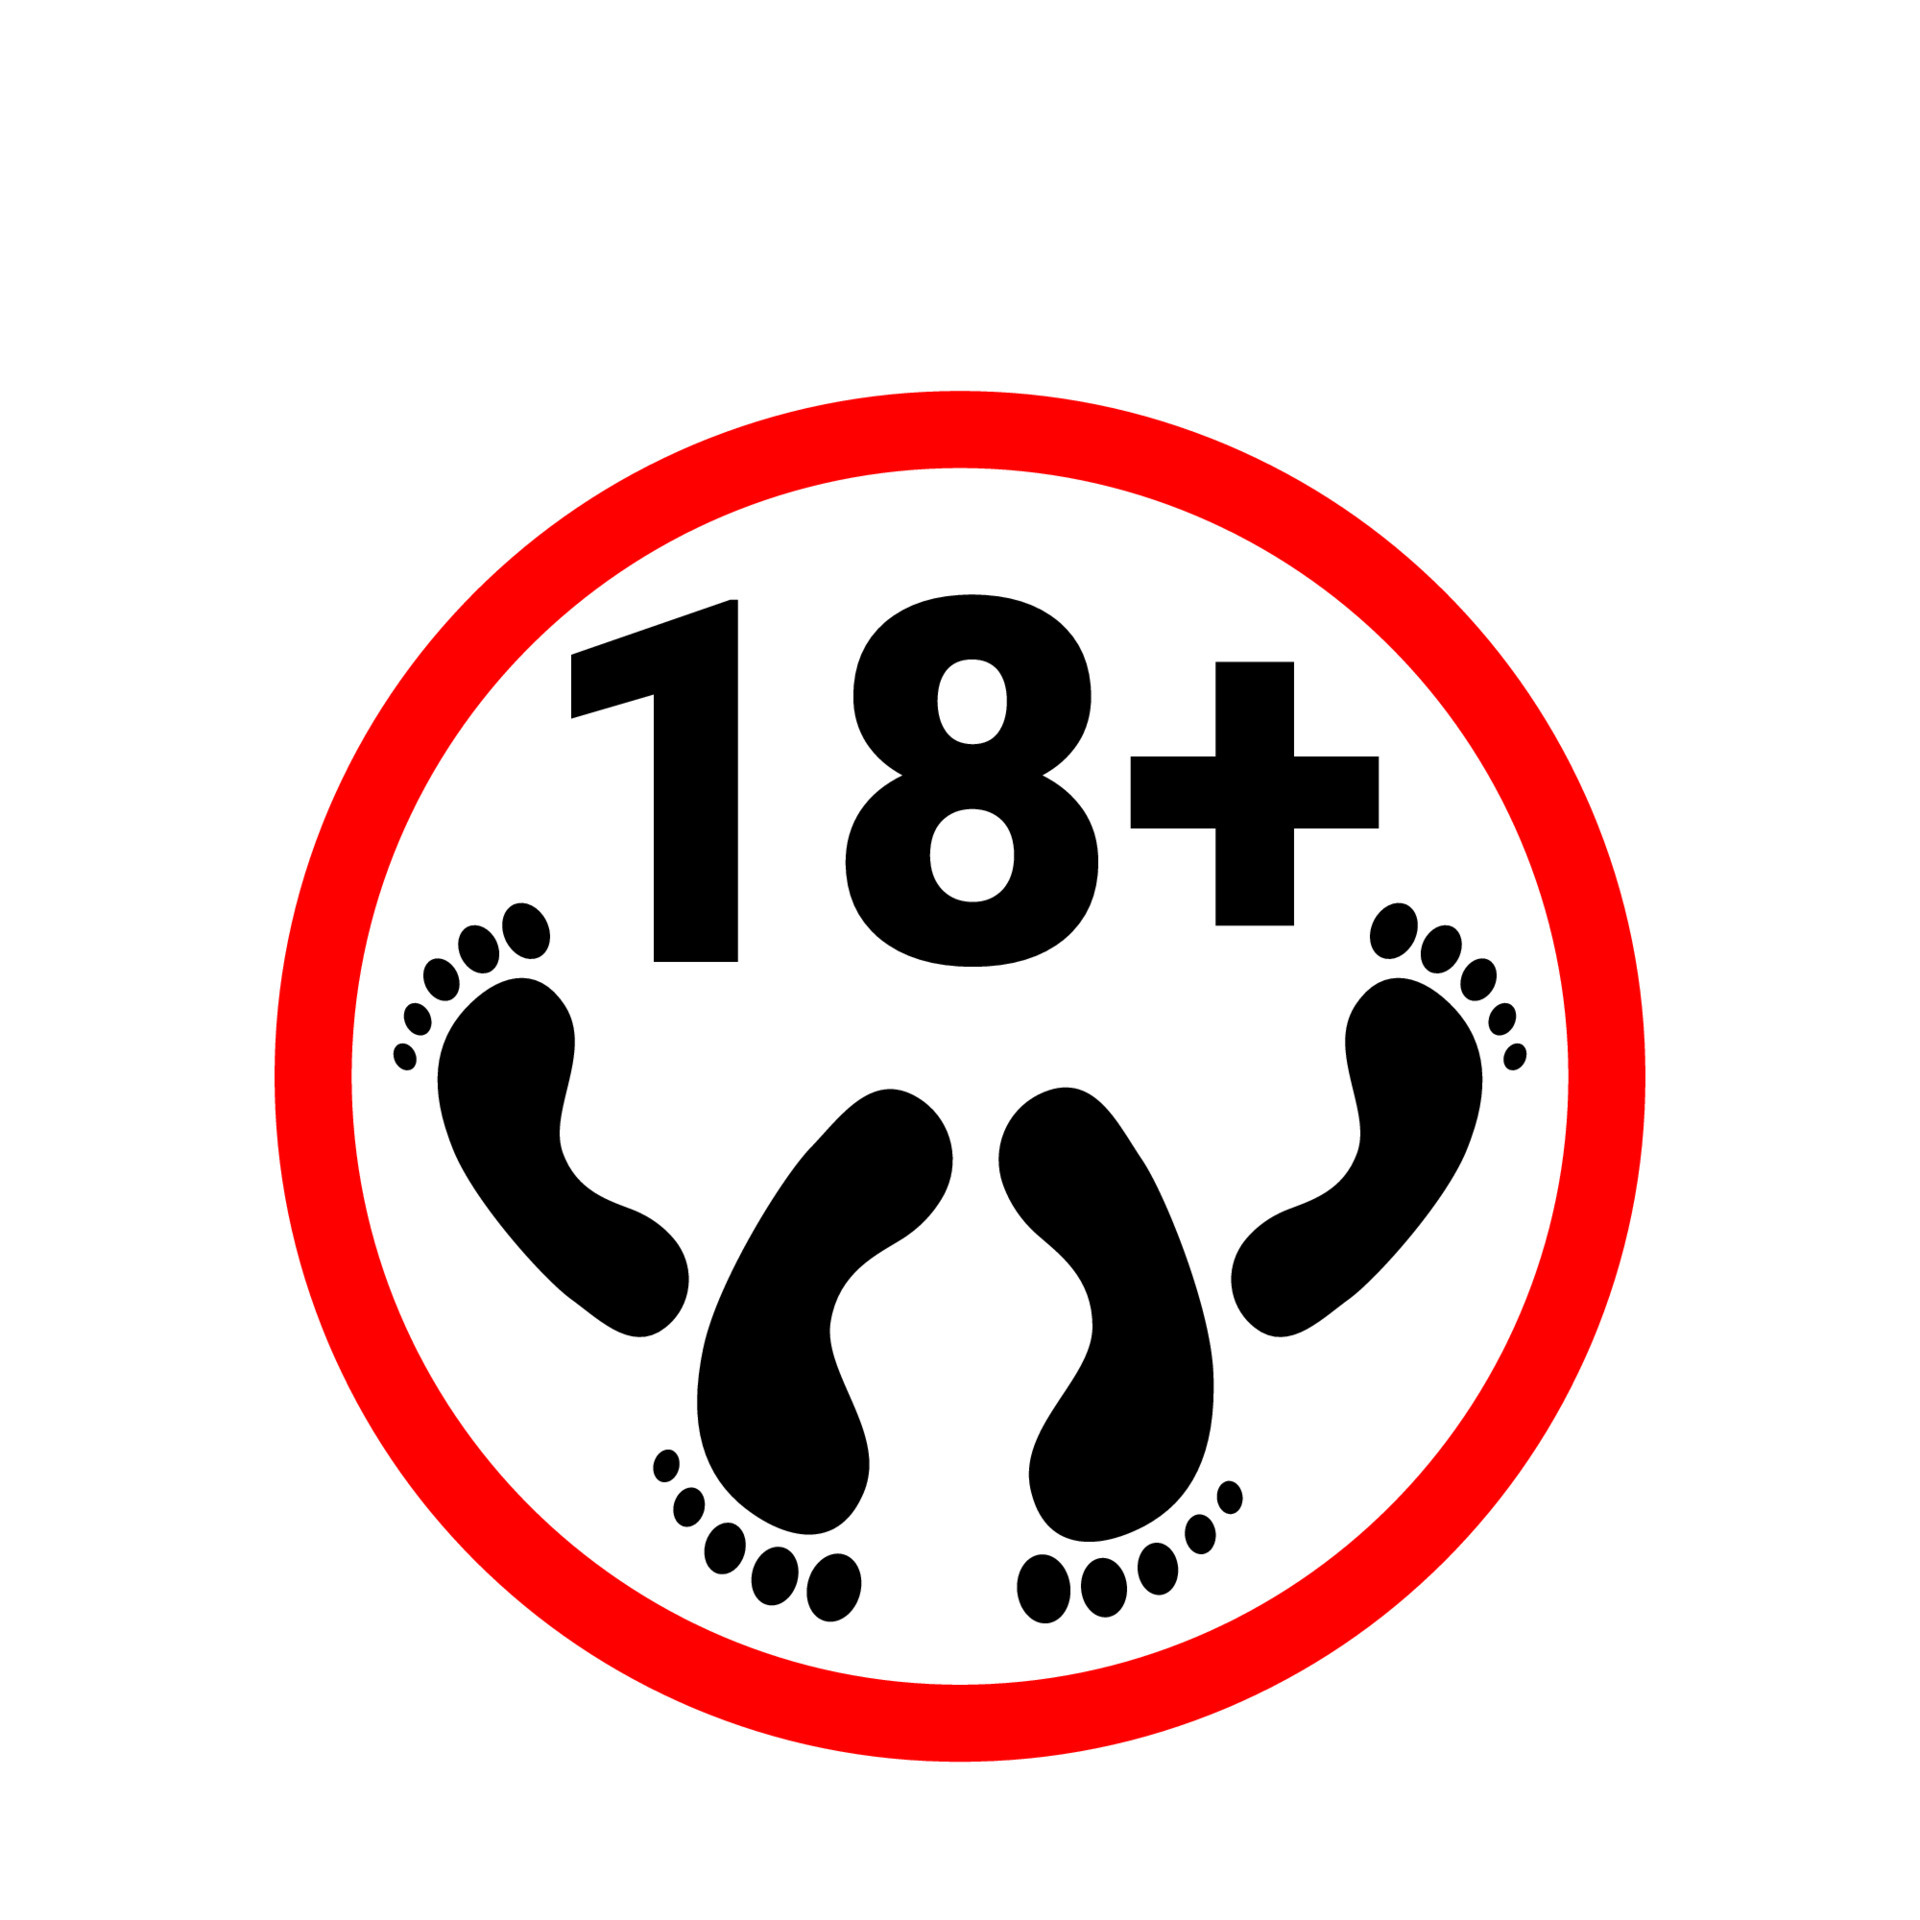 18 plus icon. Prohibition sign for persons under eighteen years of age. Sex  Content for adults. Red circle with numbers 18 plus and two pairs of legs.  Vector icon isolated on white